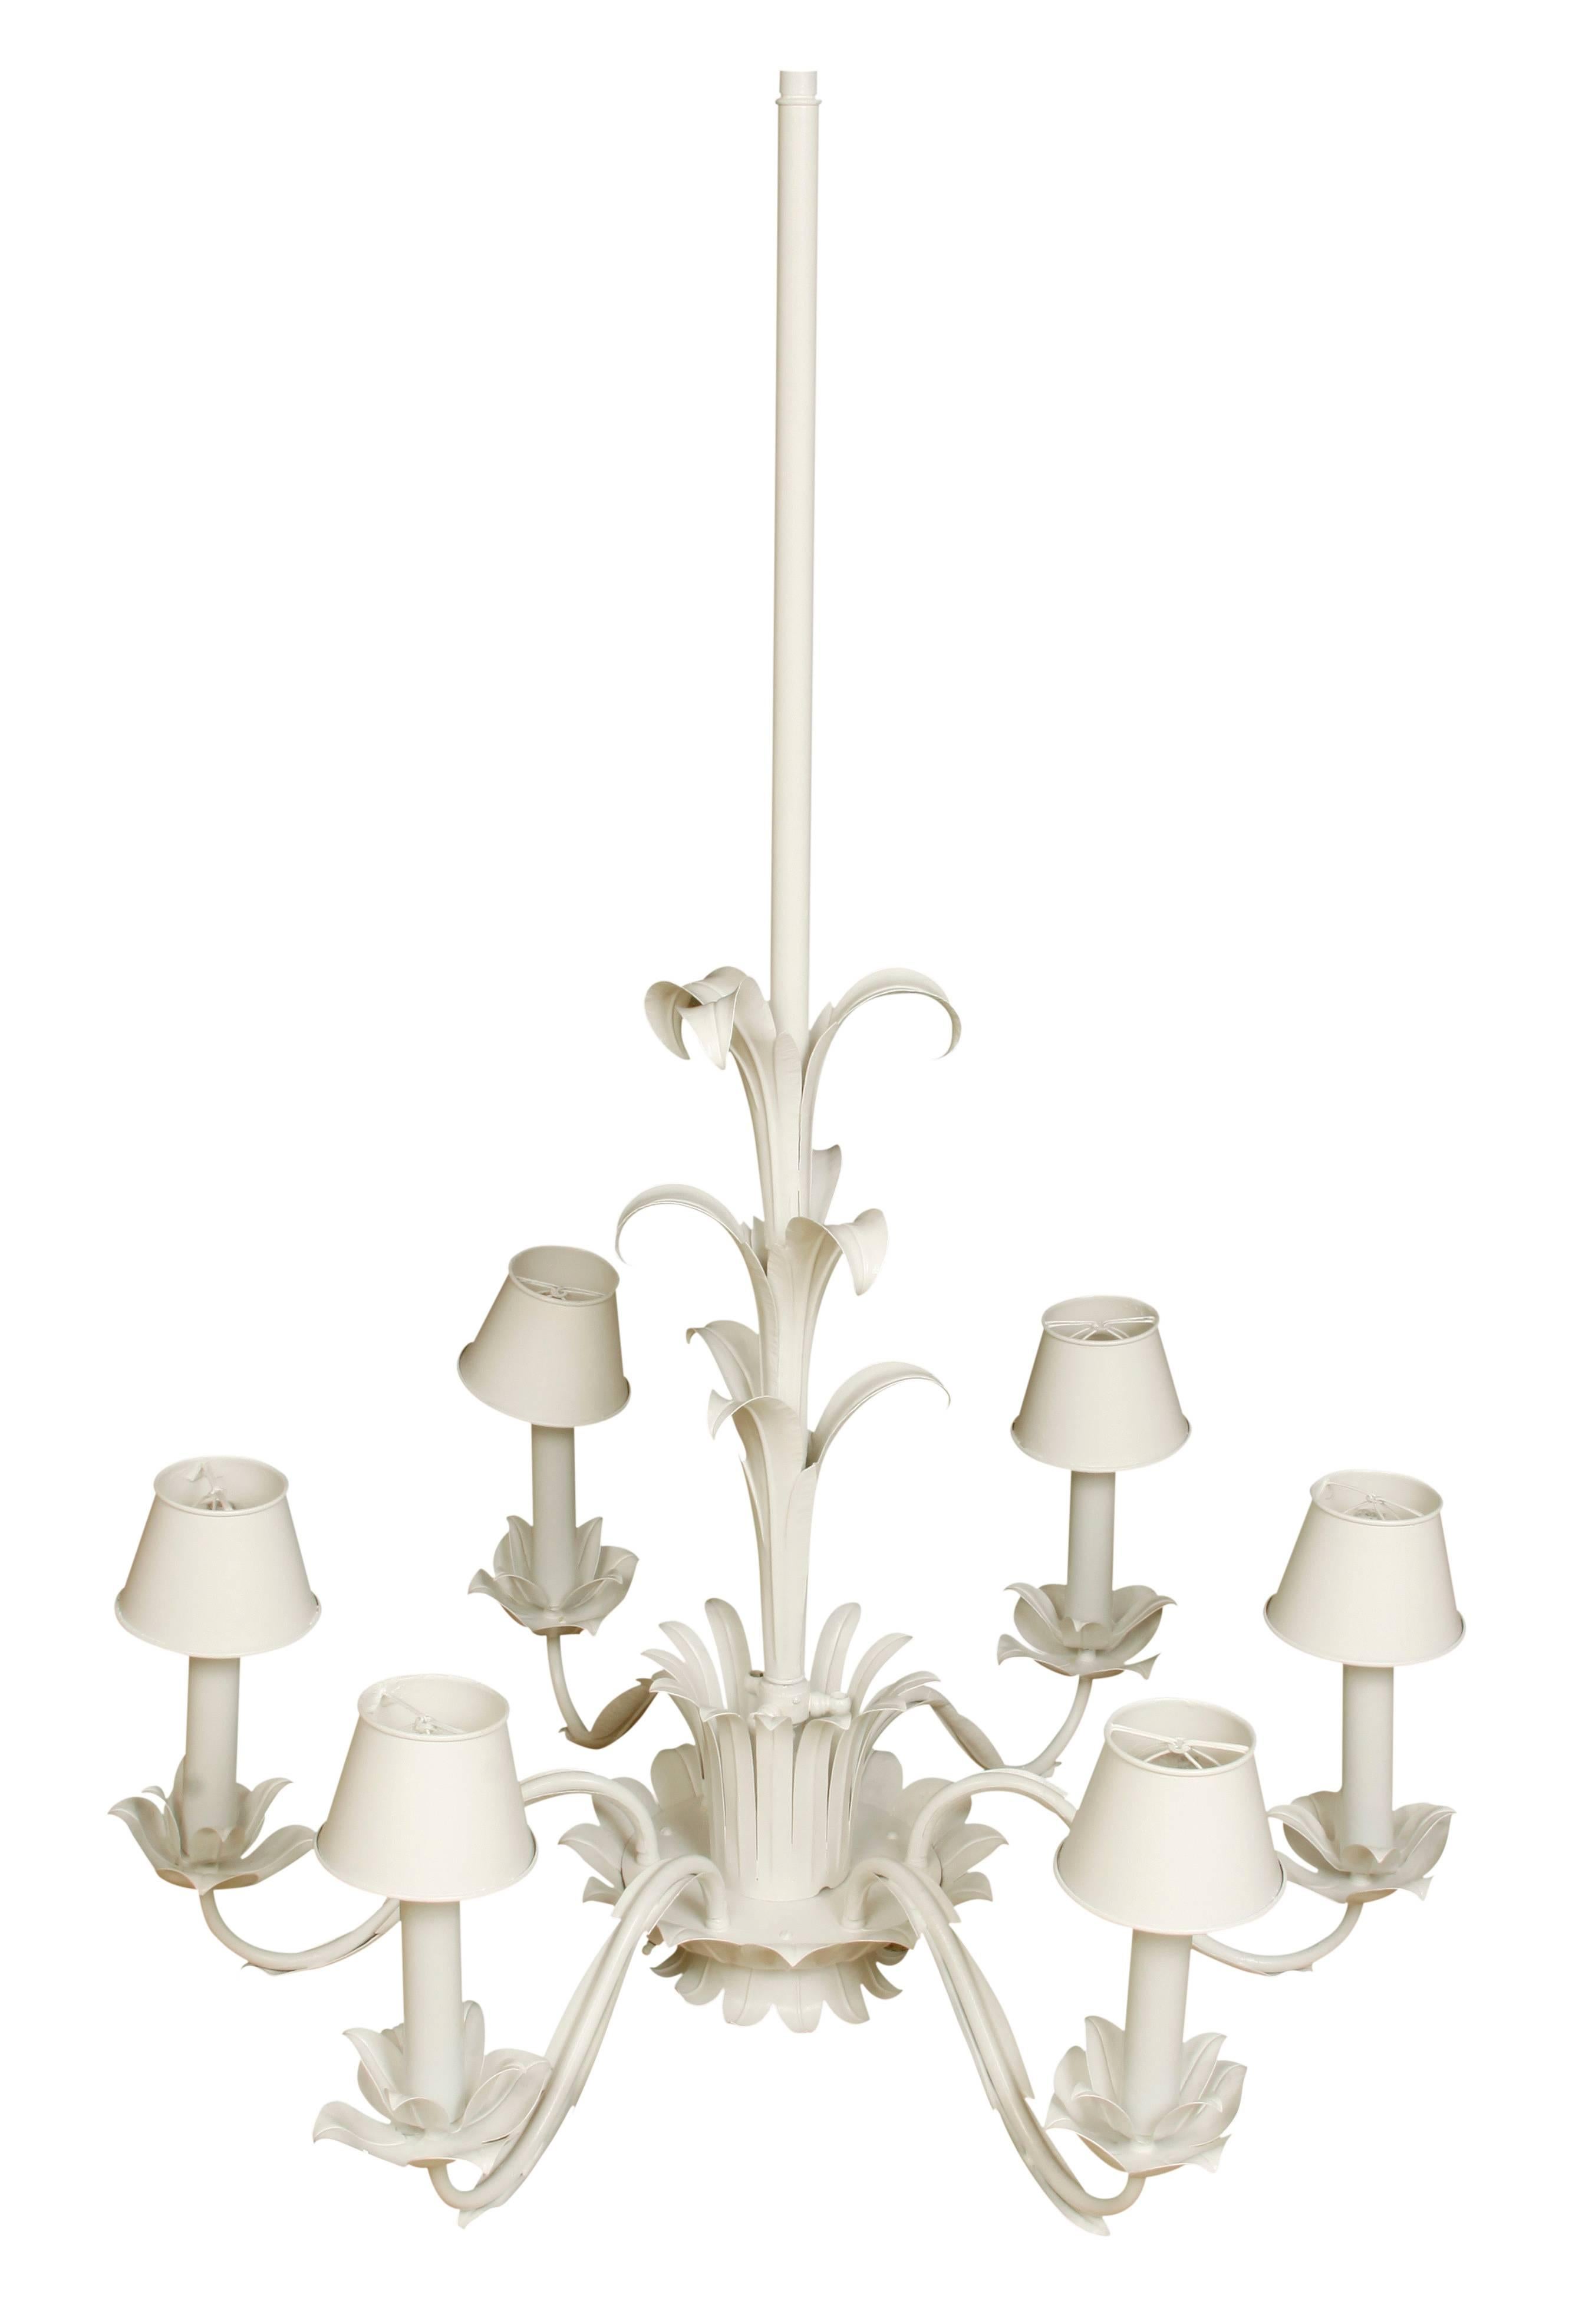 A six-arm sculpted metal lotus style chandeliers with matching metal shades.